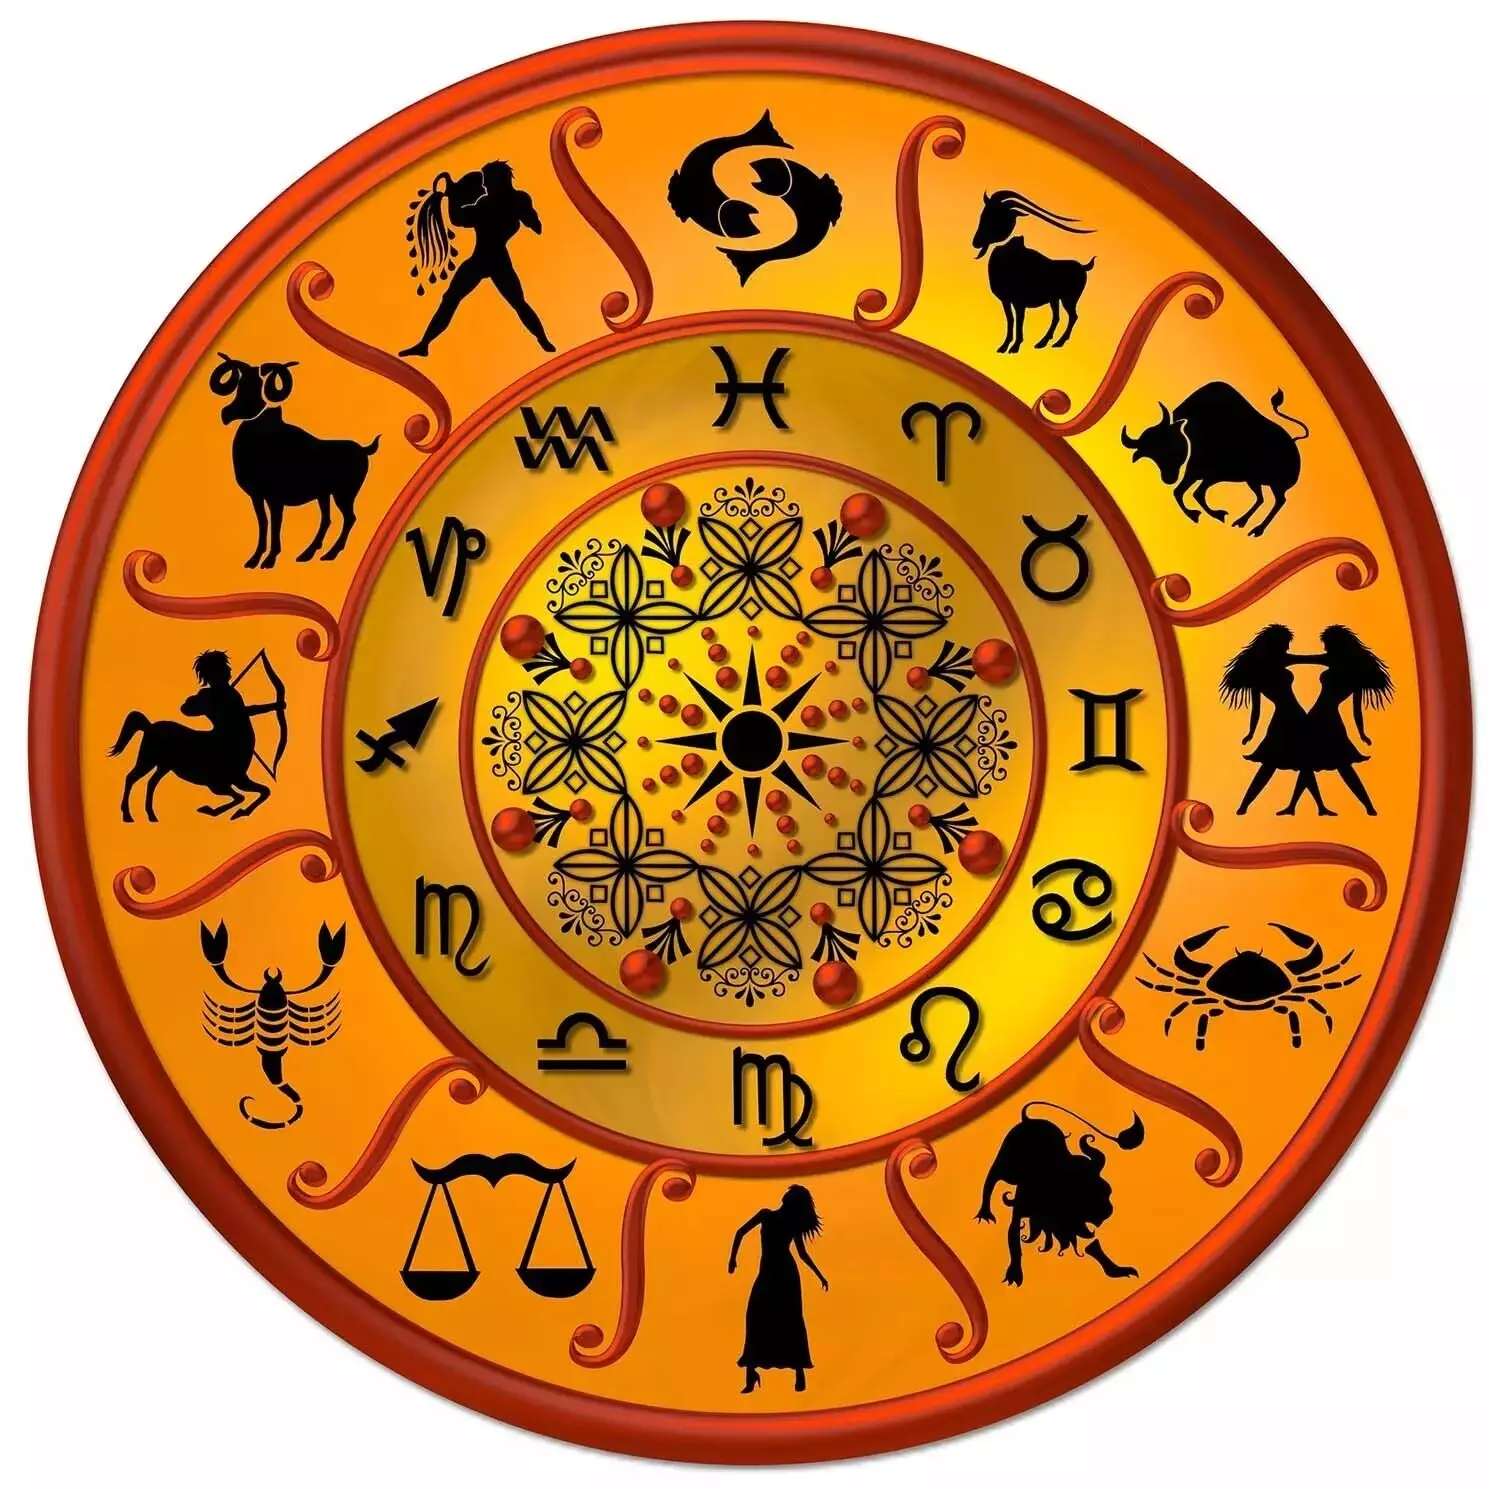 13 September  – Know your todays horoscope